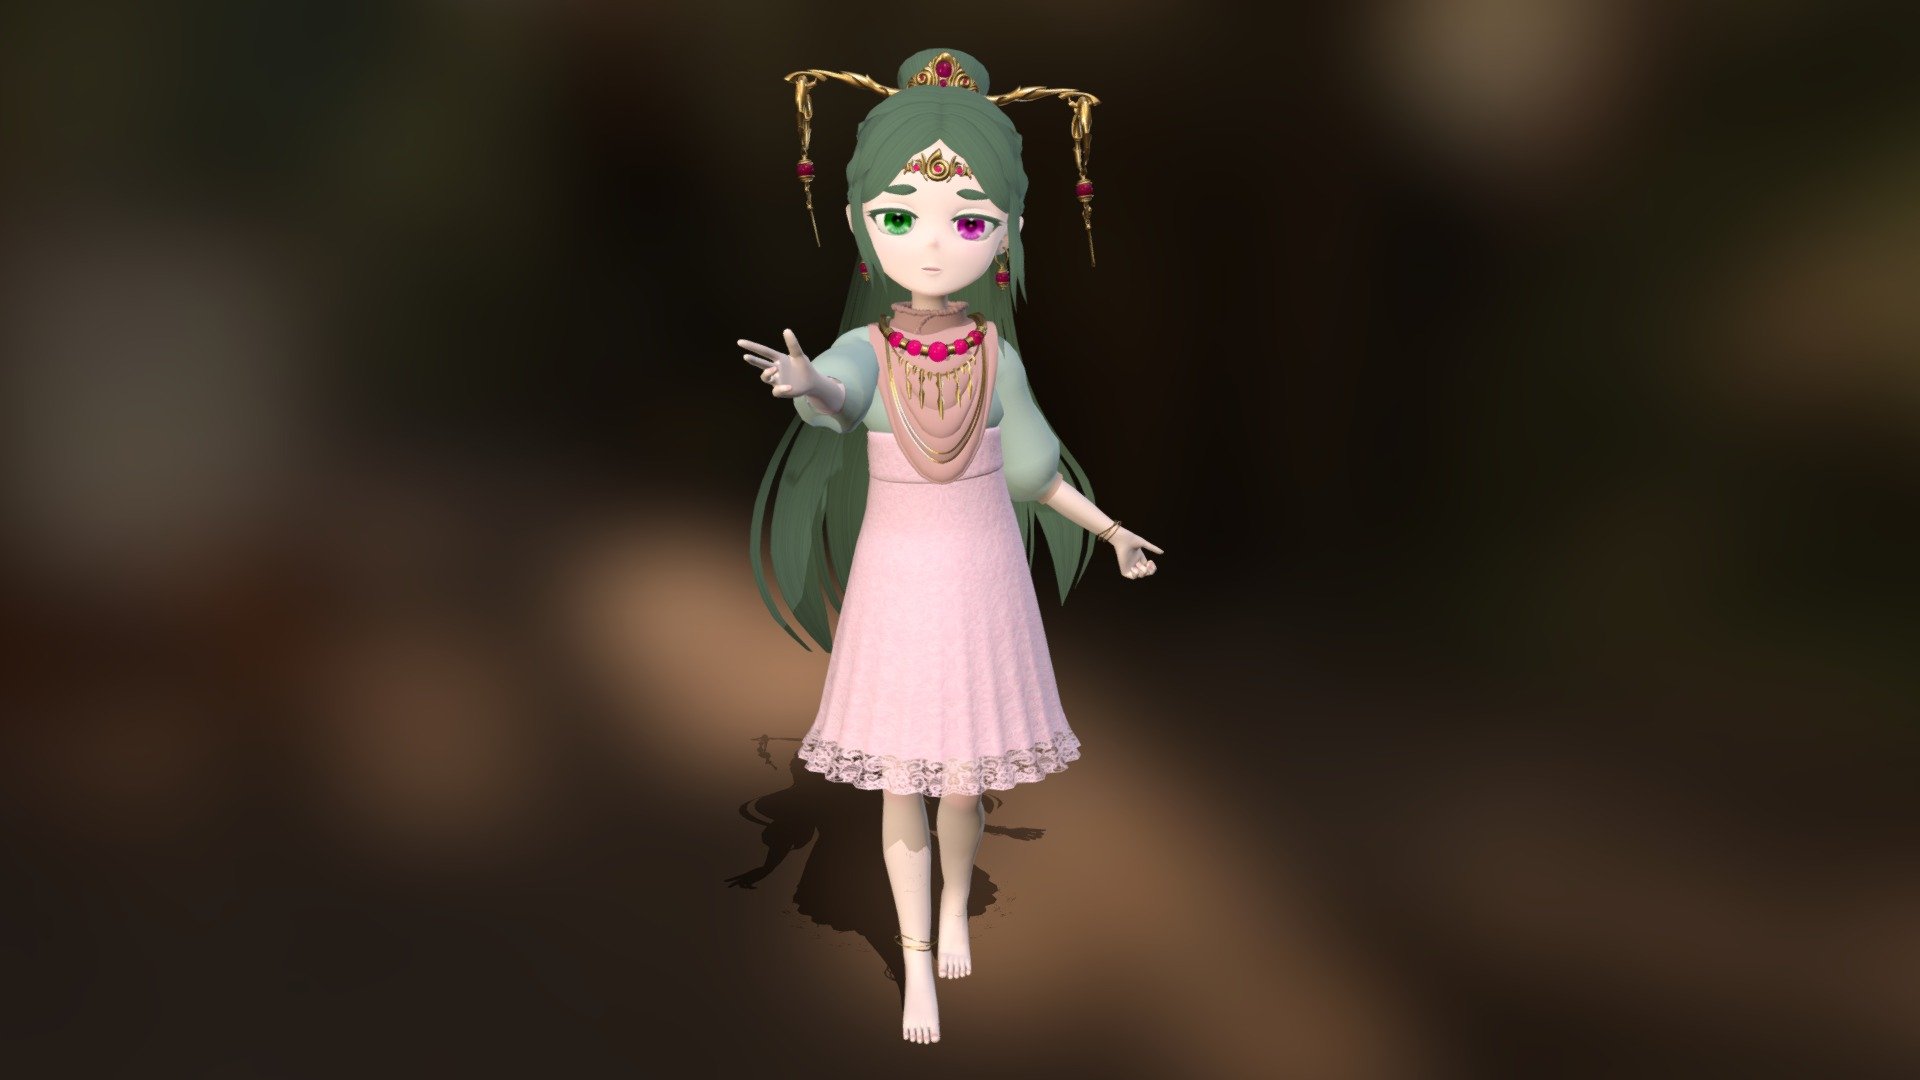 Rlim is the occupational name of a forest-dwelling minority priestess, a girl who obtains an oracle by offering half of her body to the snake god as a dependency. Her left eye, which is discolored, is the result of this. The accessories on her head and chest are in the shape of a god.

琉璃蟲（るりむ）は、とある森に暮らす少数民族の巫女の職名で、その体の半分を依り代として蛇神に差し出すことで神託を得る少女です。変色した左目はその影響です。頭や胸のアクセサリーは神の姿を模したものです。 - Rlim the Shamaness - 3D model by scramasax 3d model